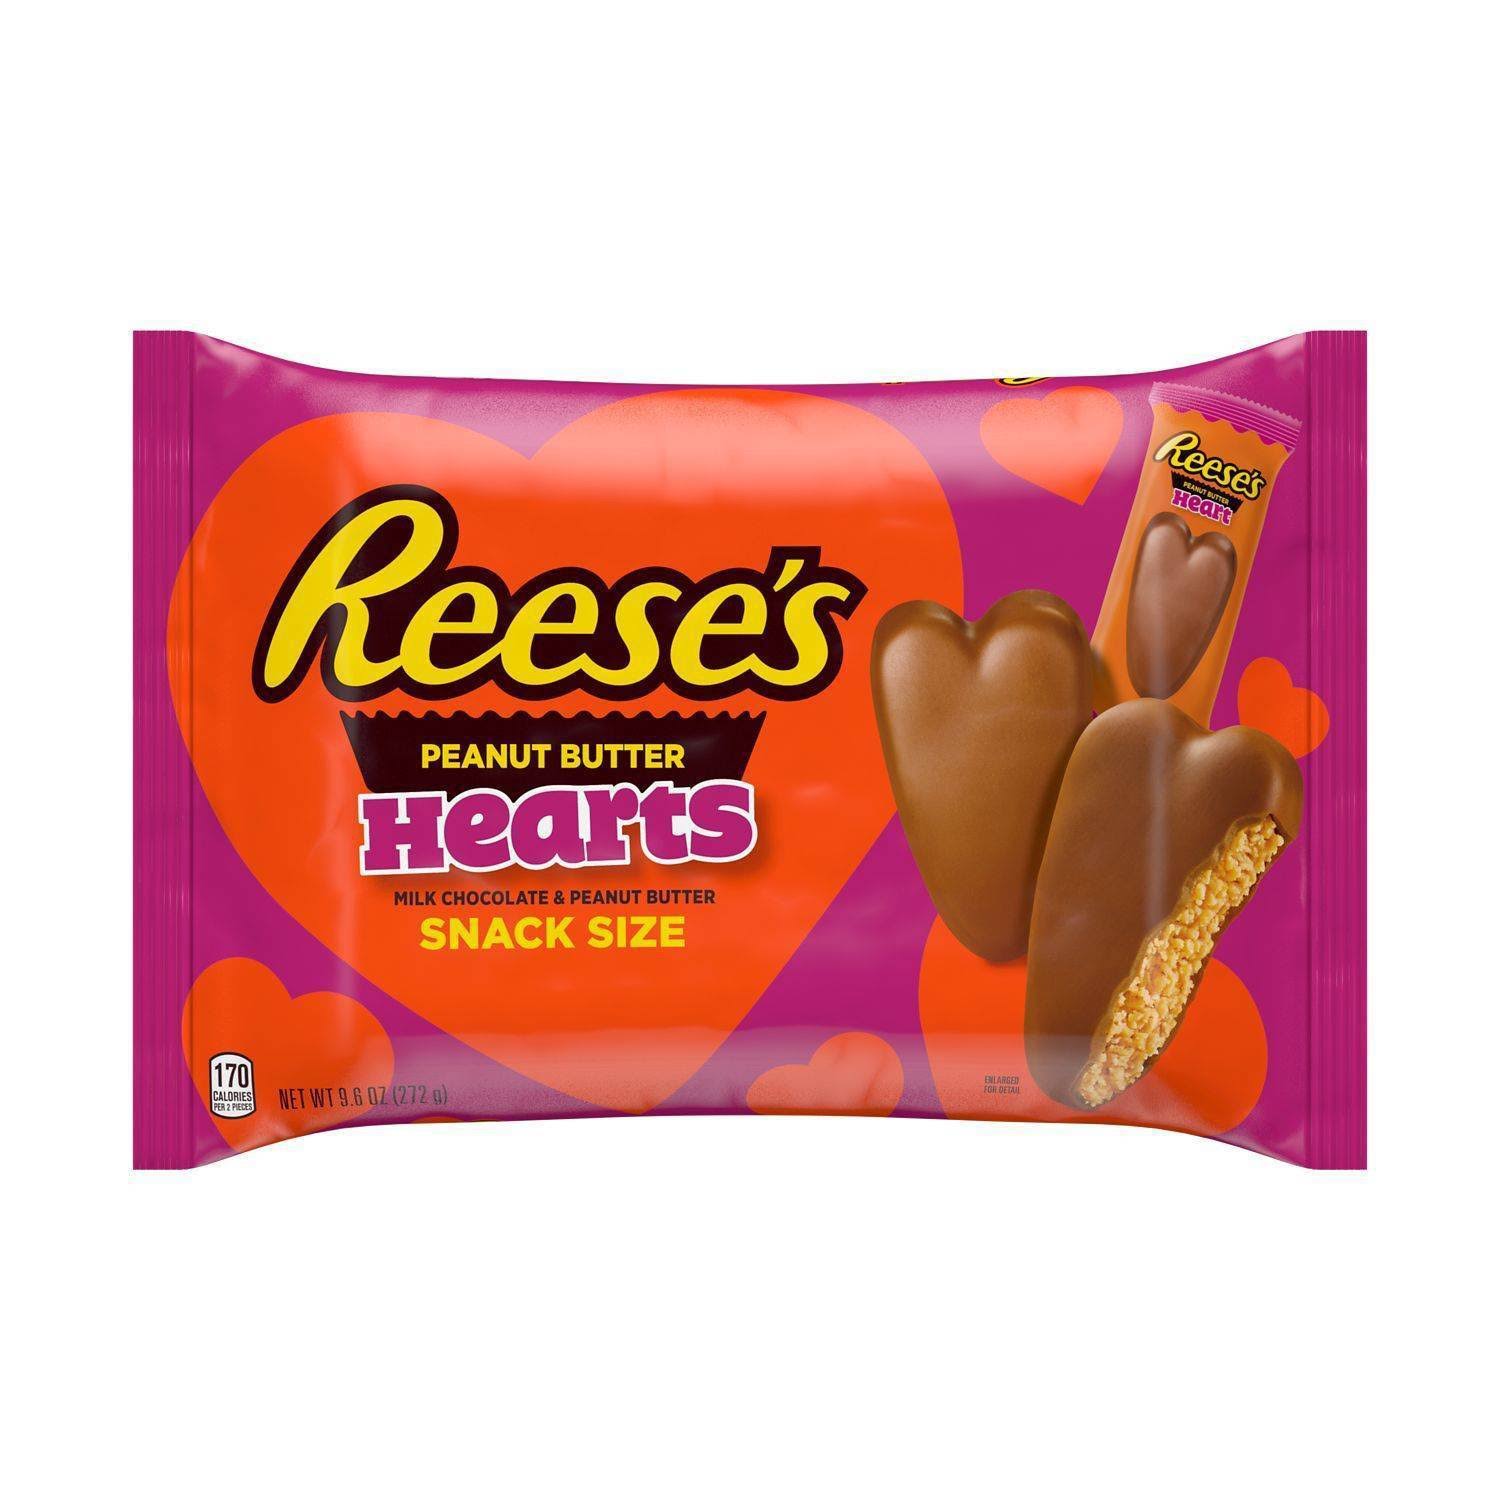 Reese's Milk Chocolate & Peanut Butter, Hearts, Snack Size - 9.6 oz